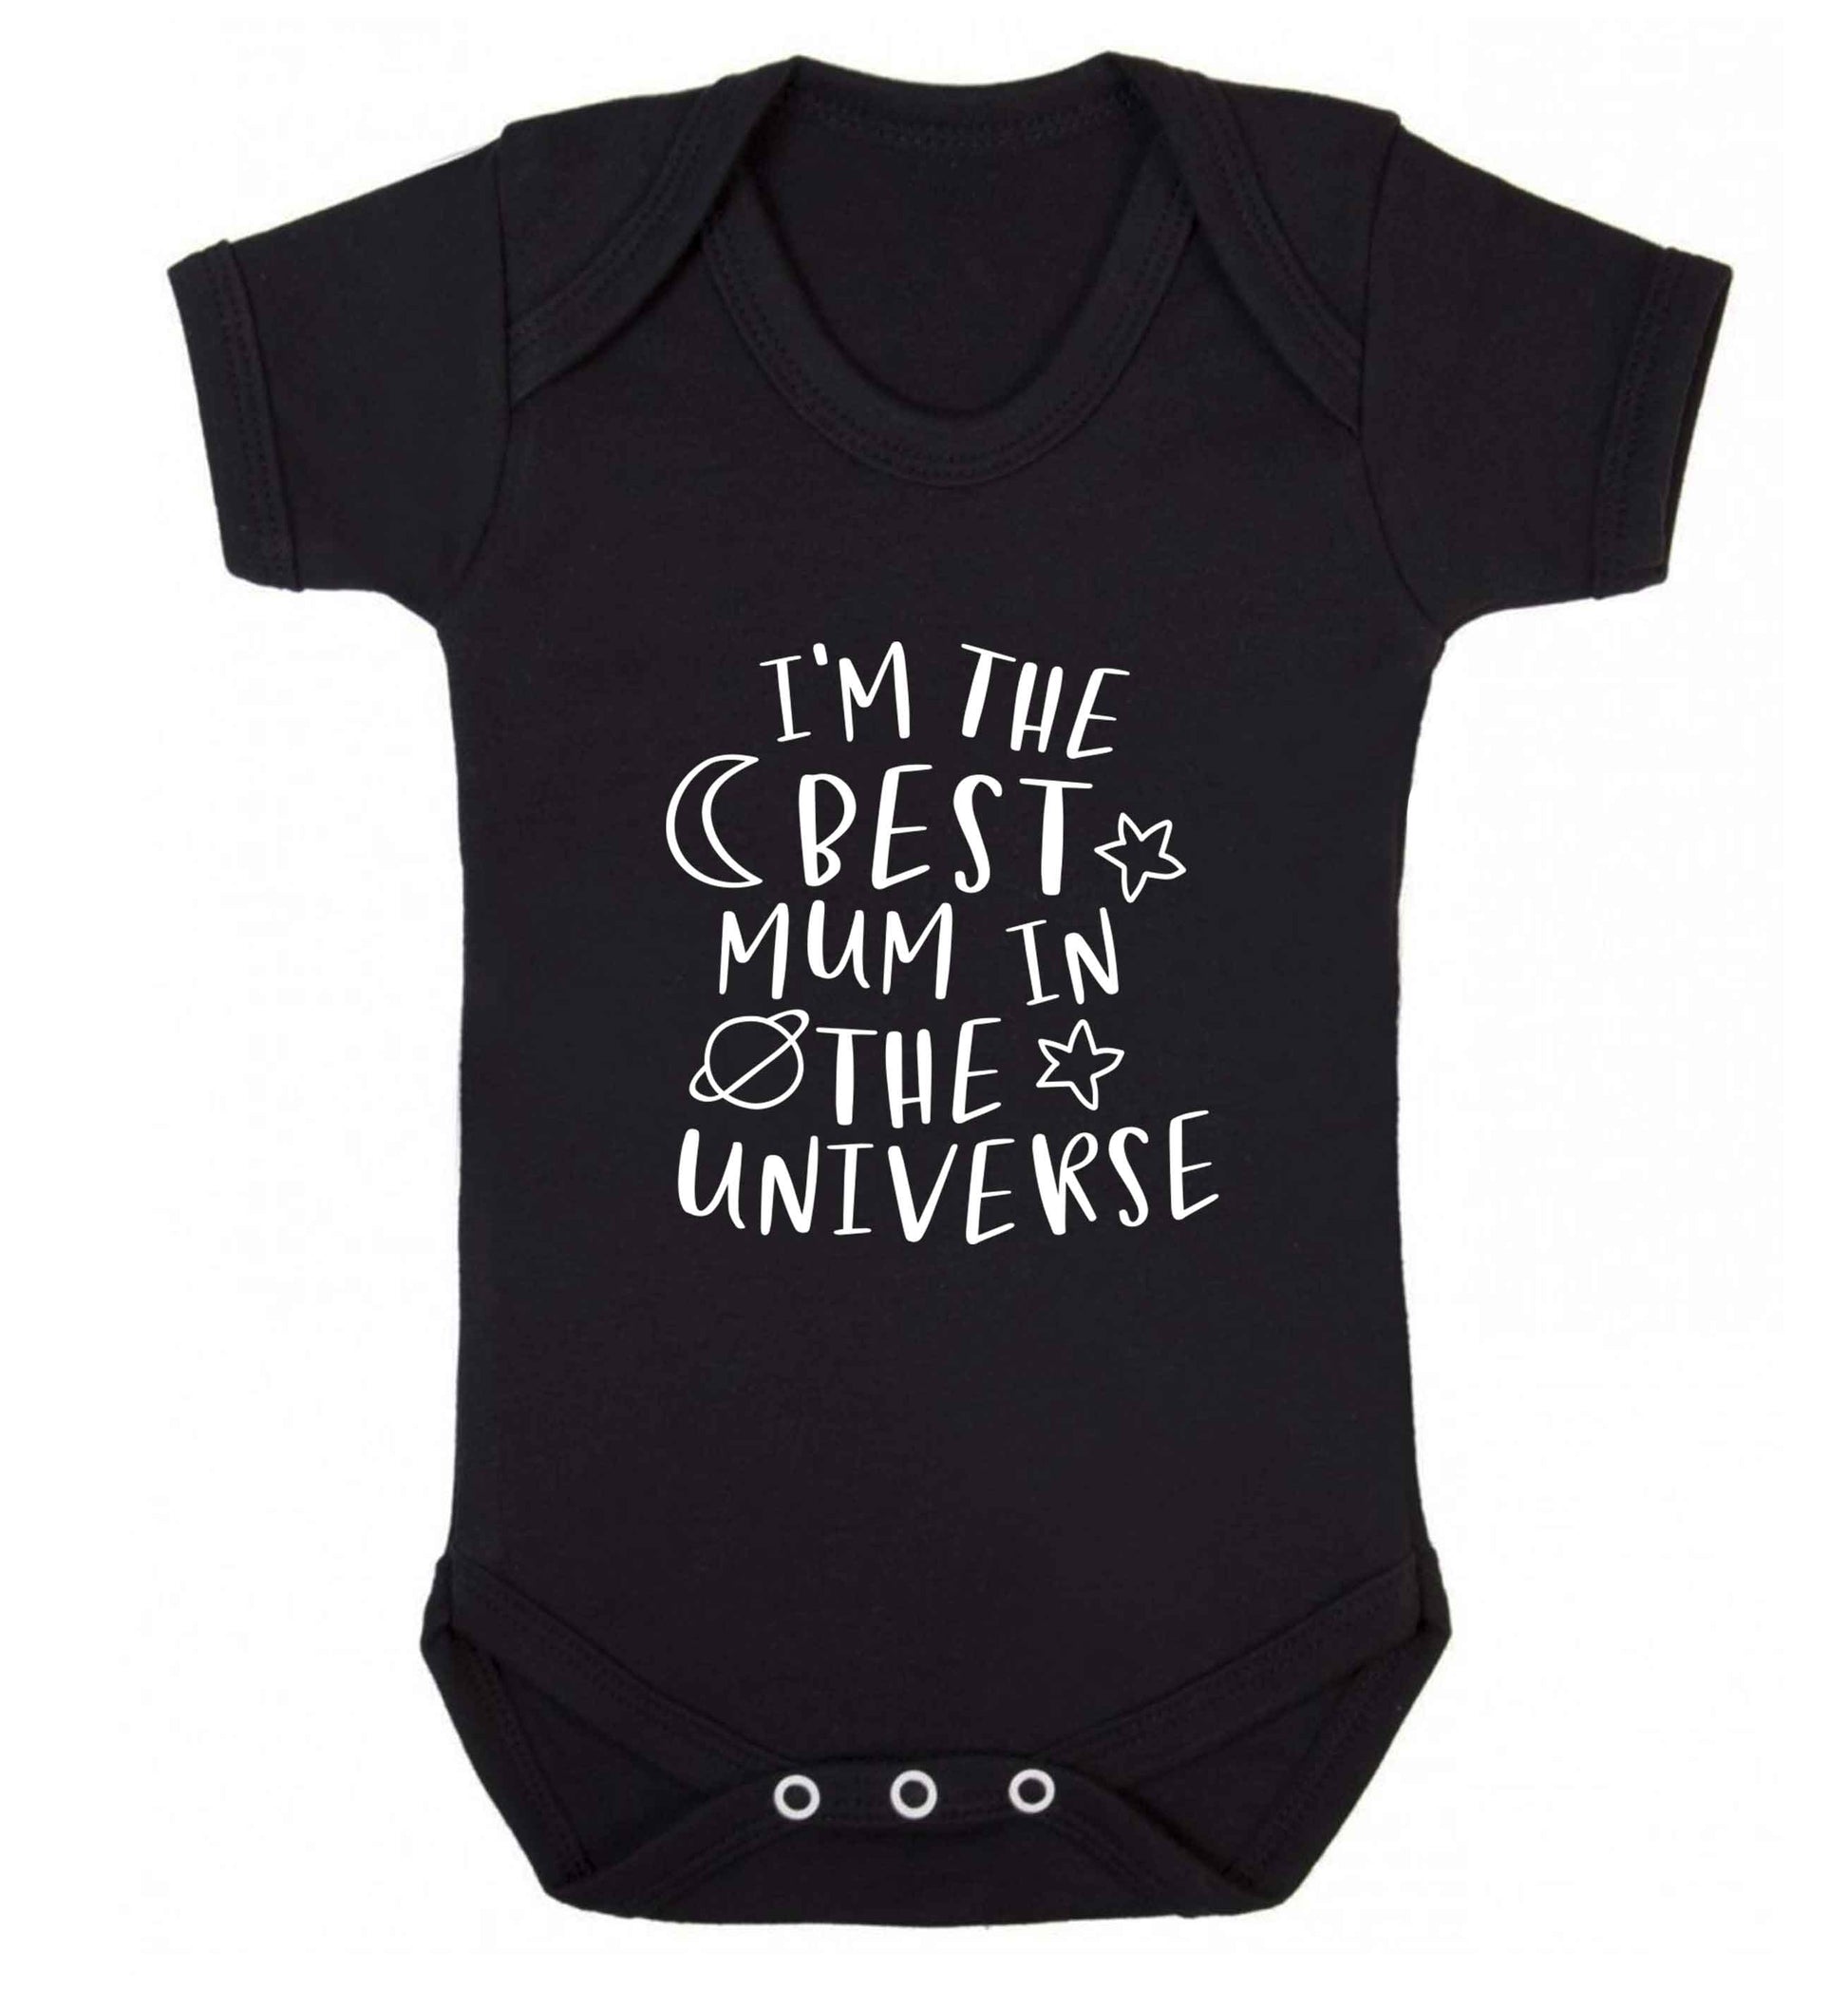 I'm the best mum in the universe baby vest black 18-24 months